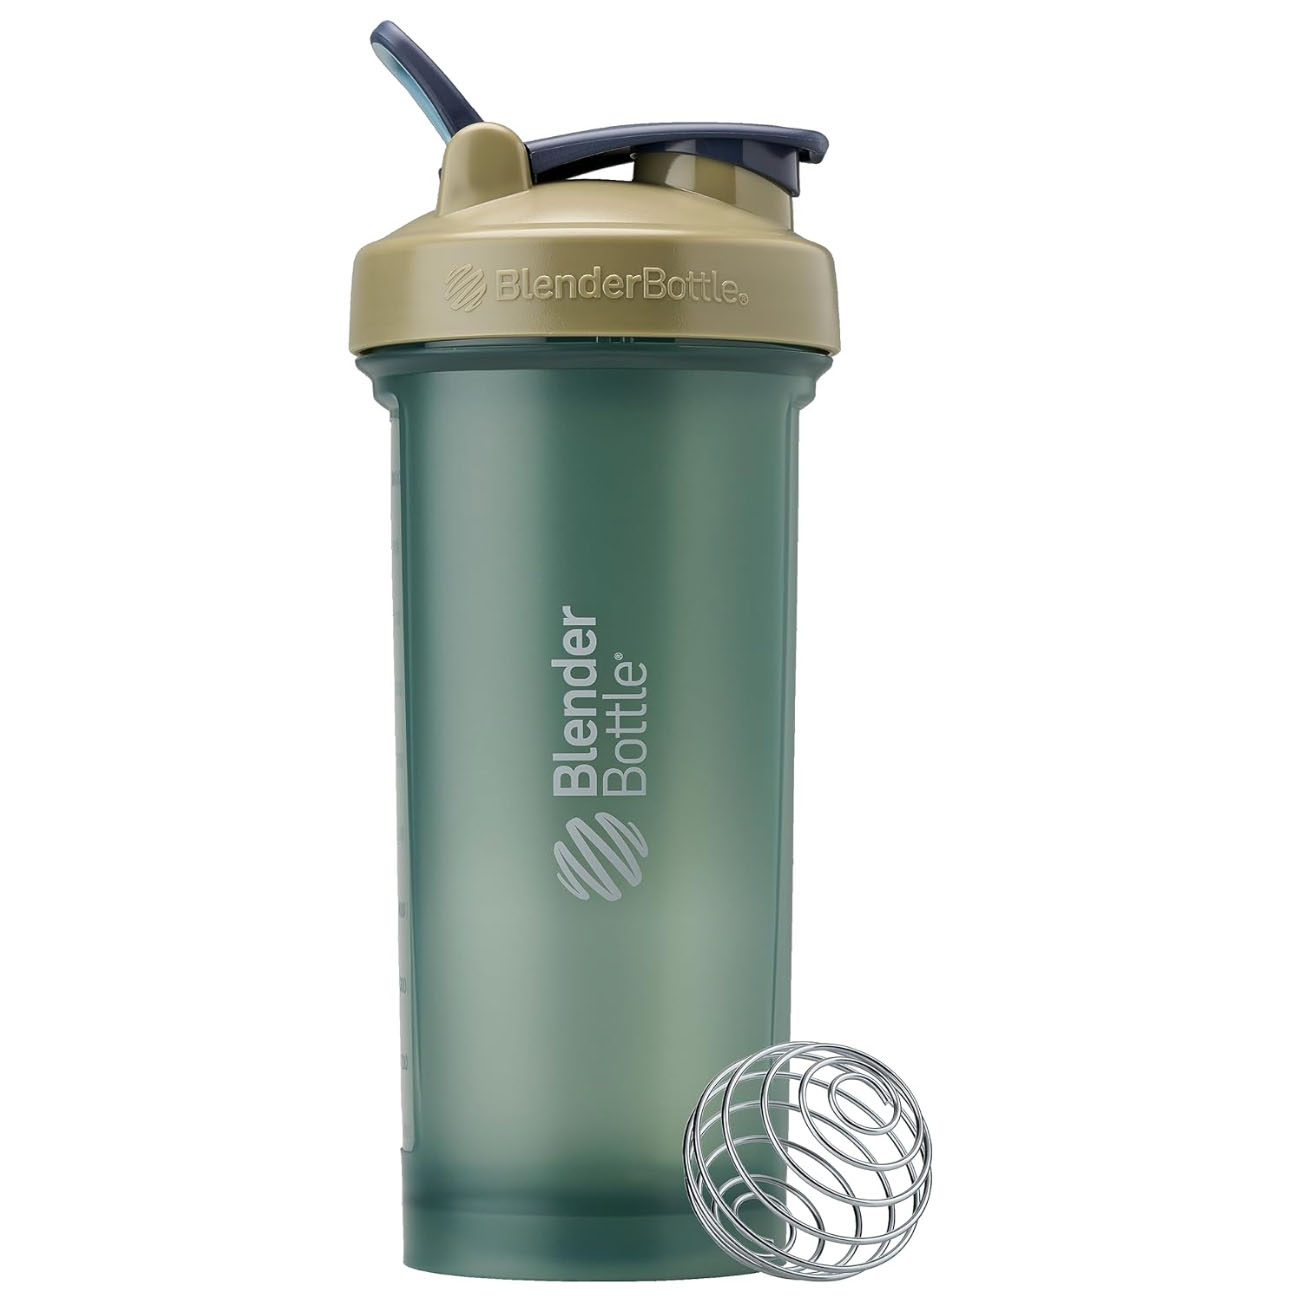 Green BlenderBottle with mixing ball